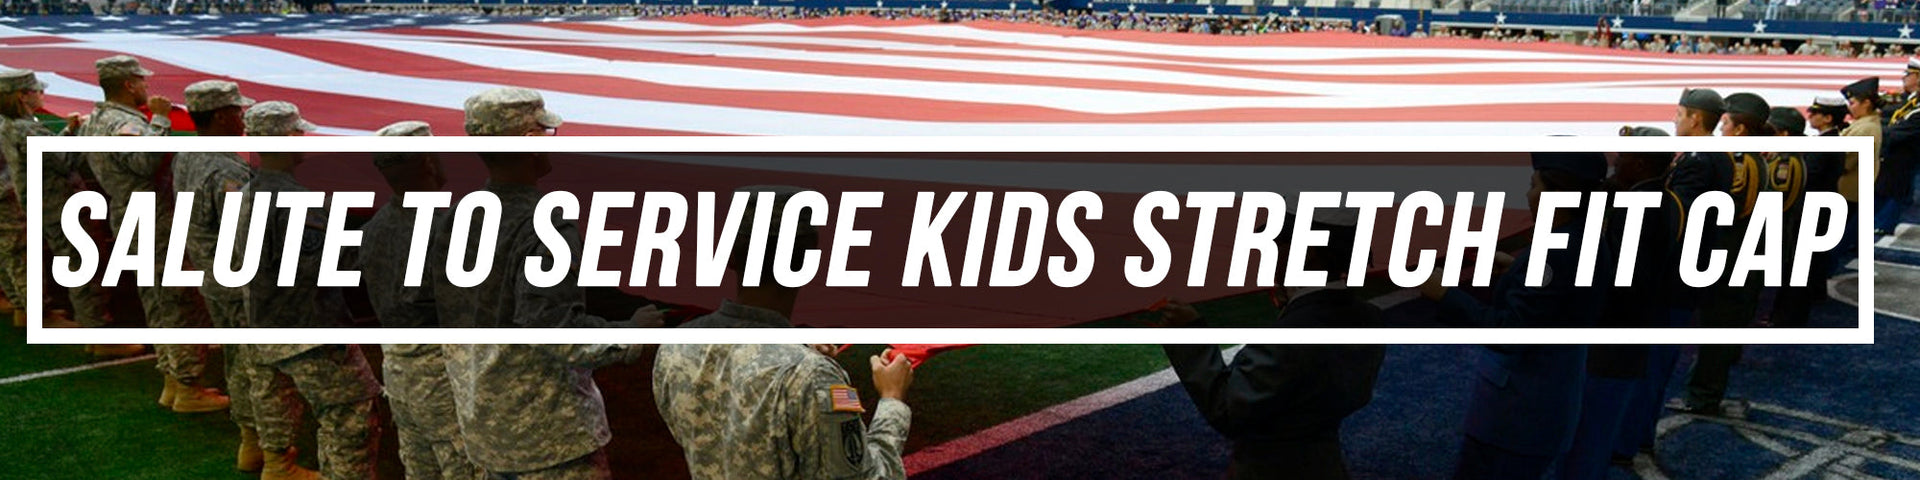 Kid's Salute To Service Stretch Fit Cap | Kid's Flexfit Salute To Service Cap